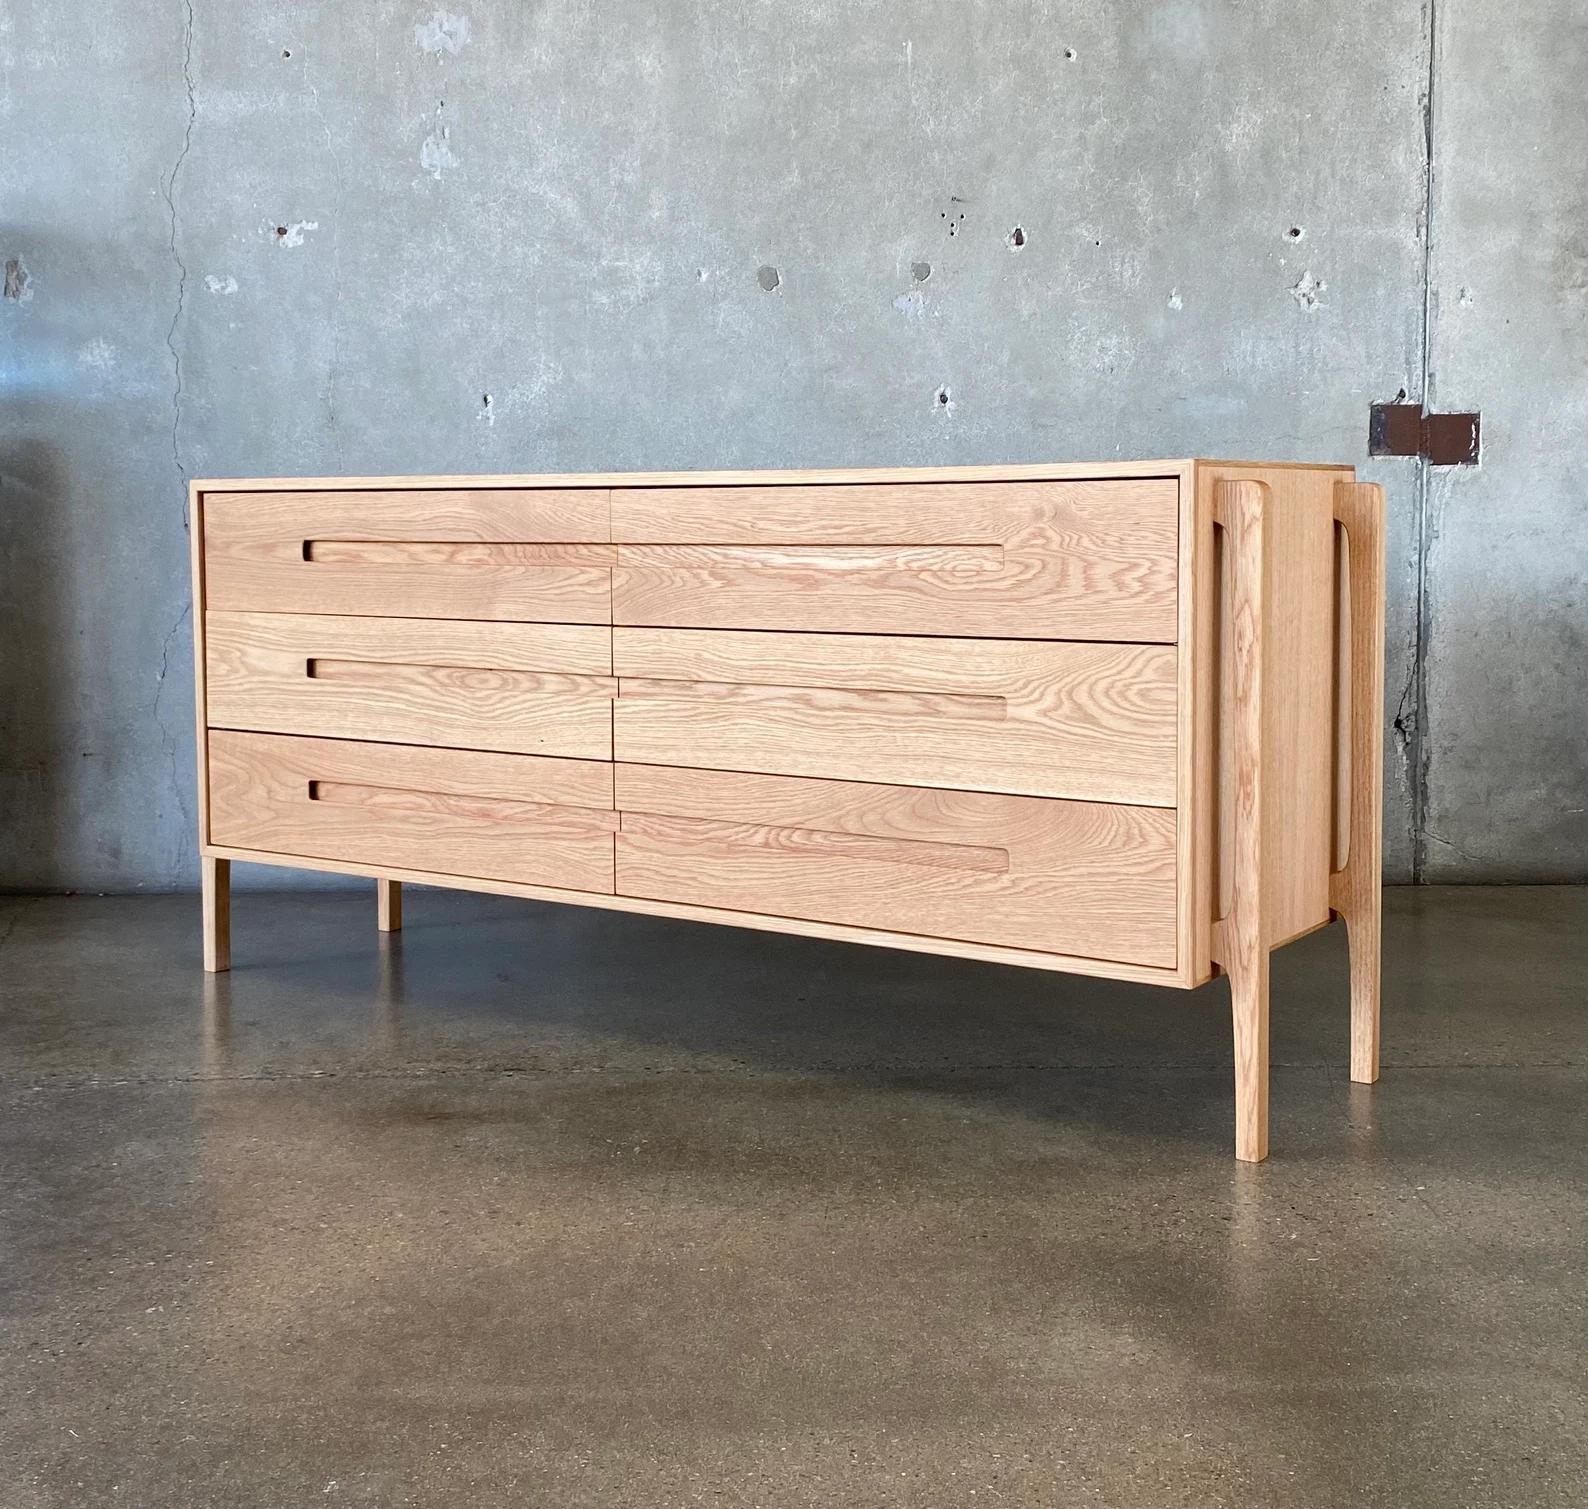 This lowboy dresser is an original Deeble design, with a strong Scandinavian/Danish Modern influence. The dresser pictured is in white oak, but it's available in any other species (i.e. walnut, cherry, mahogany, etc.).

The drawers are